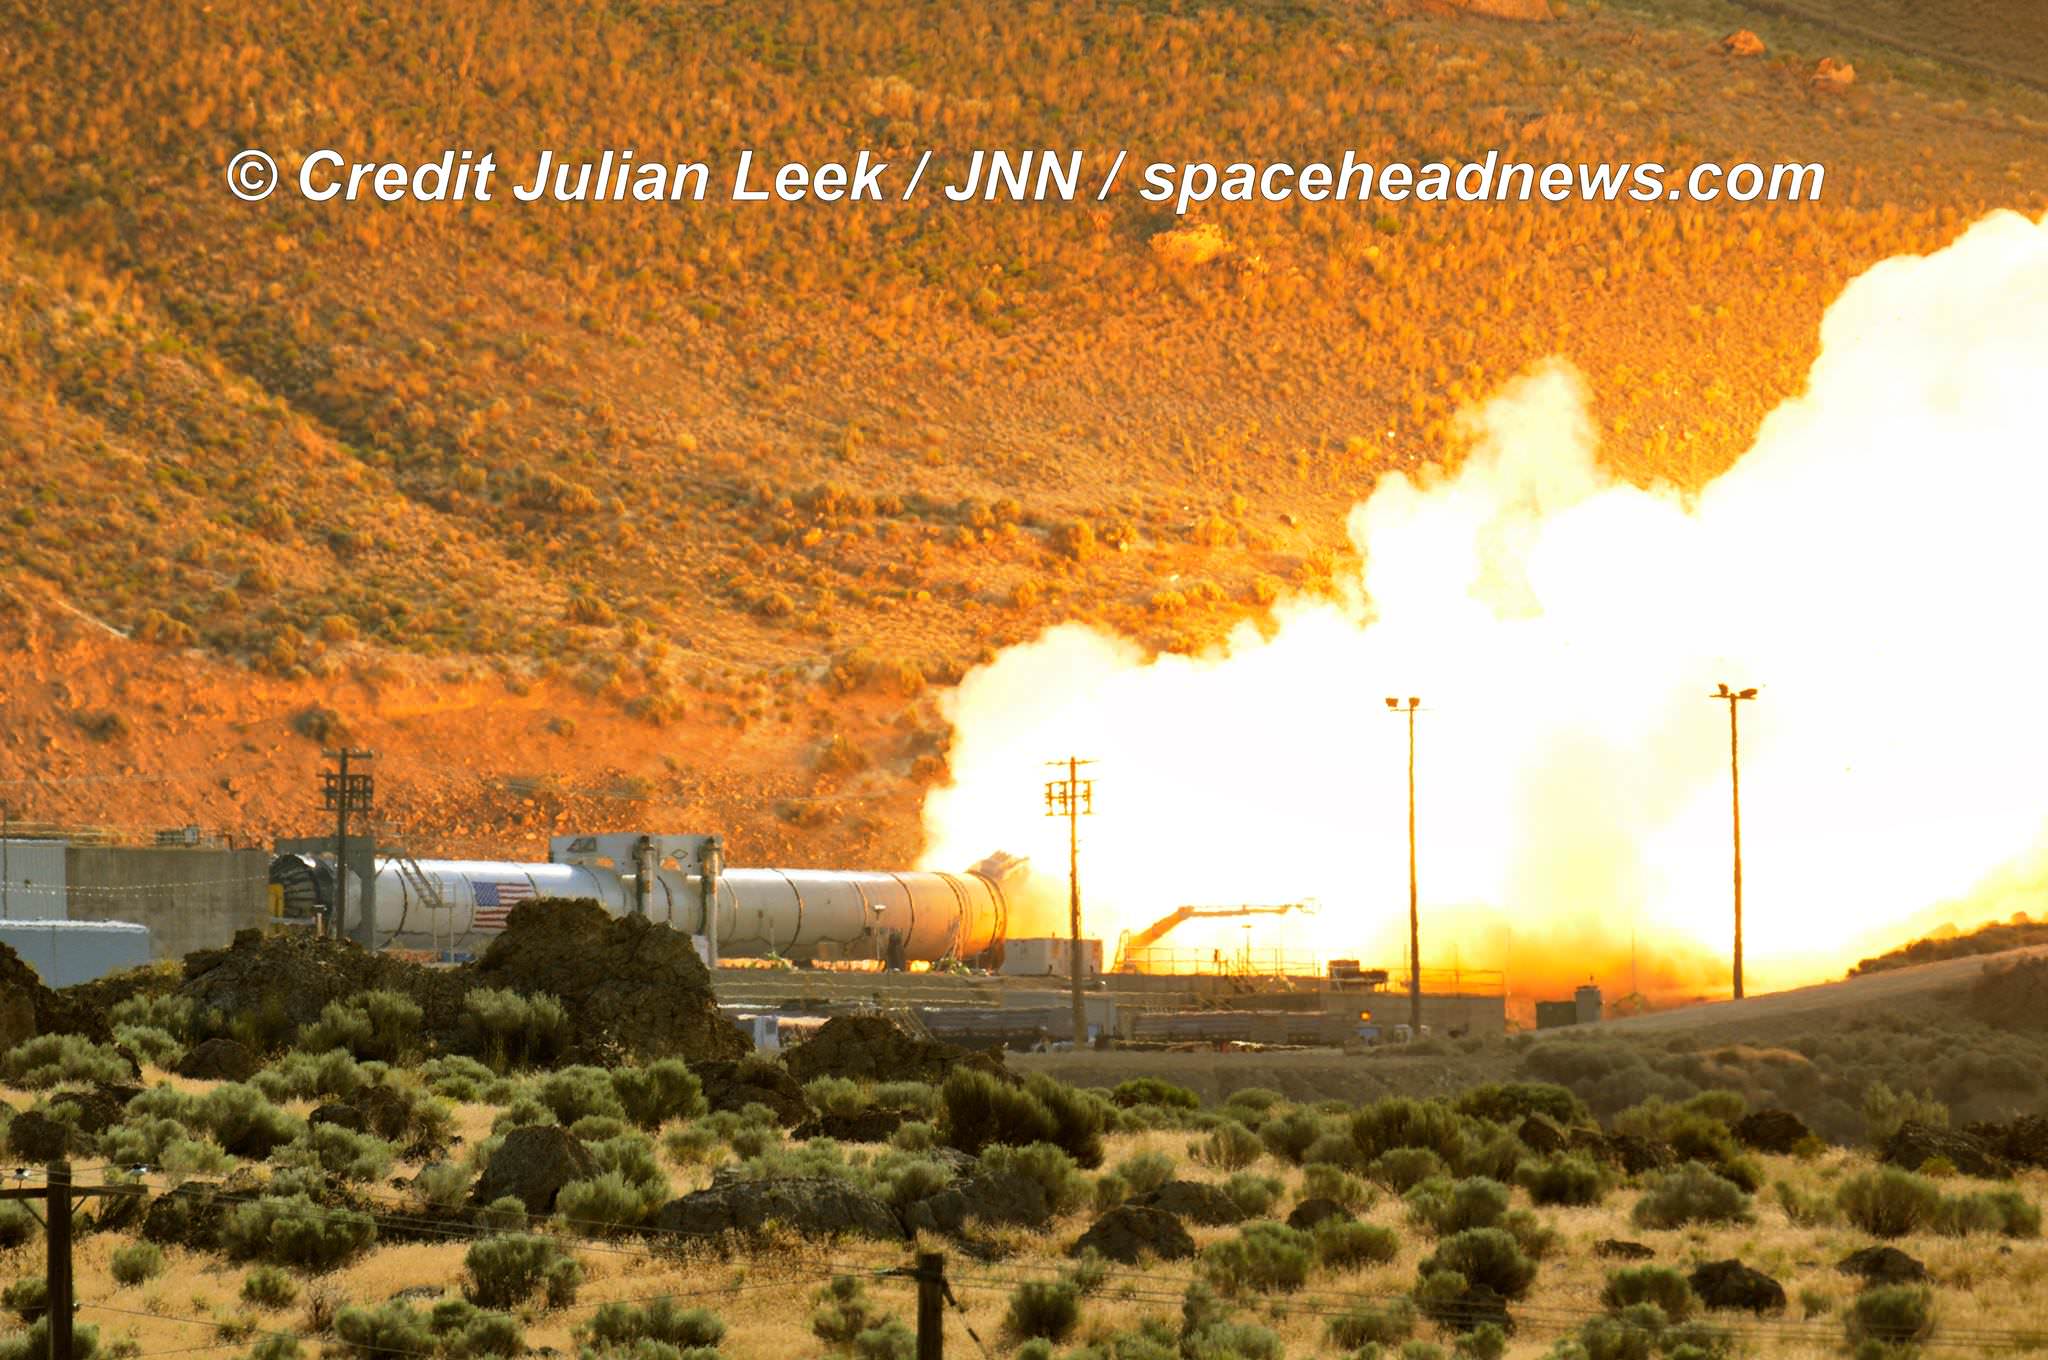 Ignition of the qualification motor (QM-2) booster during test firing for NASA’s Space Launch System as seen on Tuesday, June 28, 2016, at Orbital ATK Propulsion System's (SLS) test facilities in Promontory, Utah.  Credit: Julian Leek 